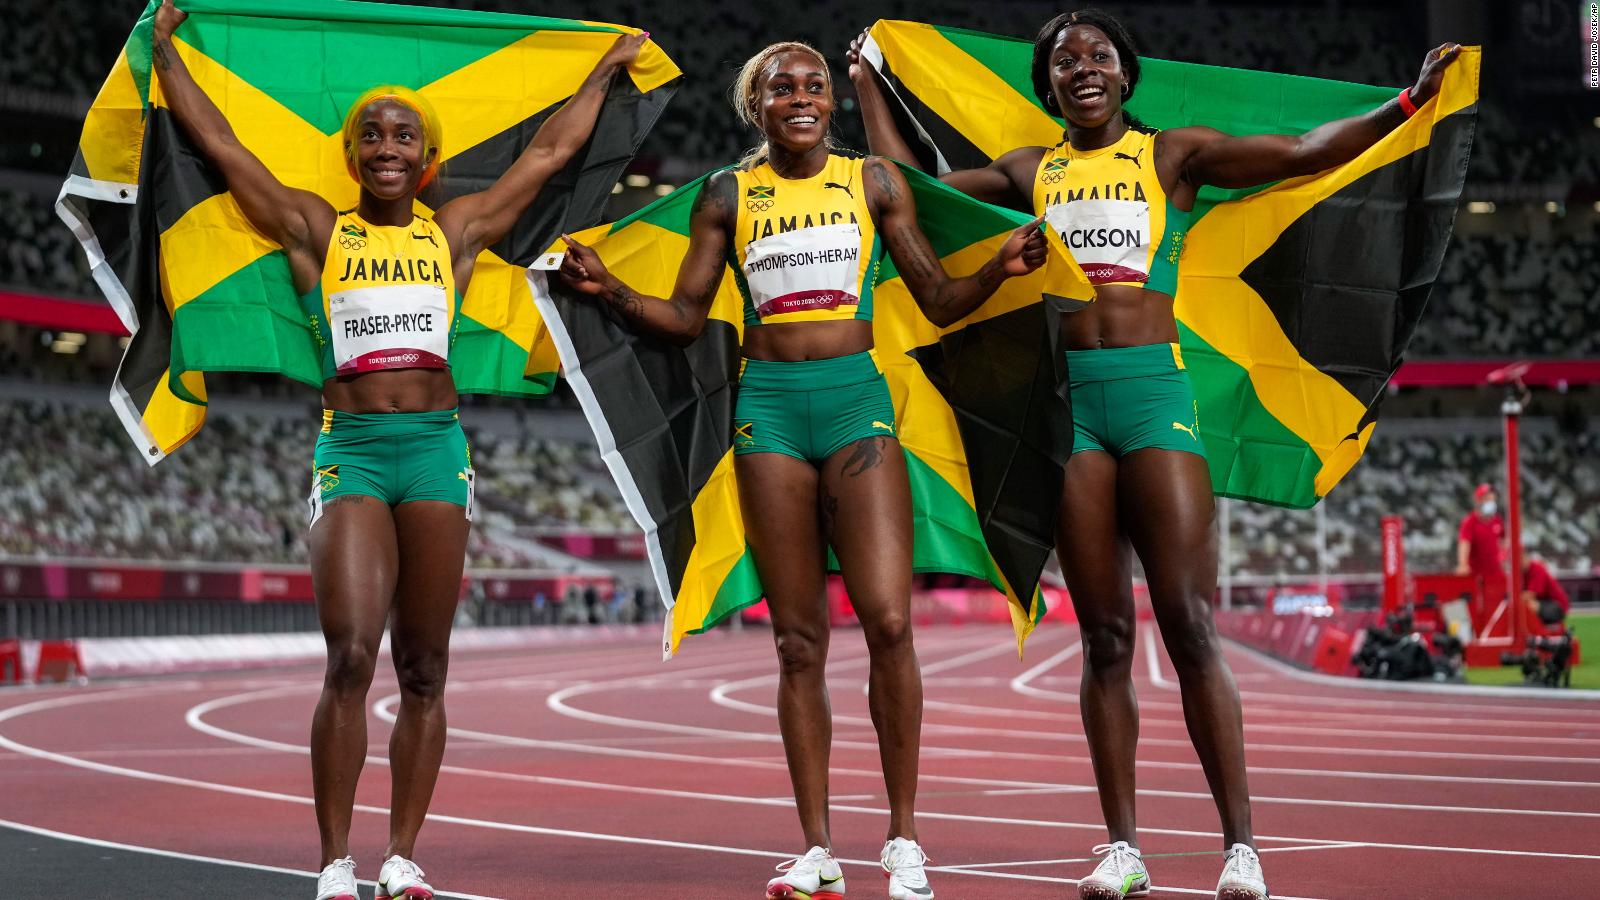 Team Jamaica runners and their mission to inspire the youngest Video